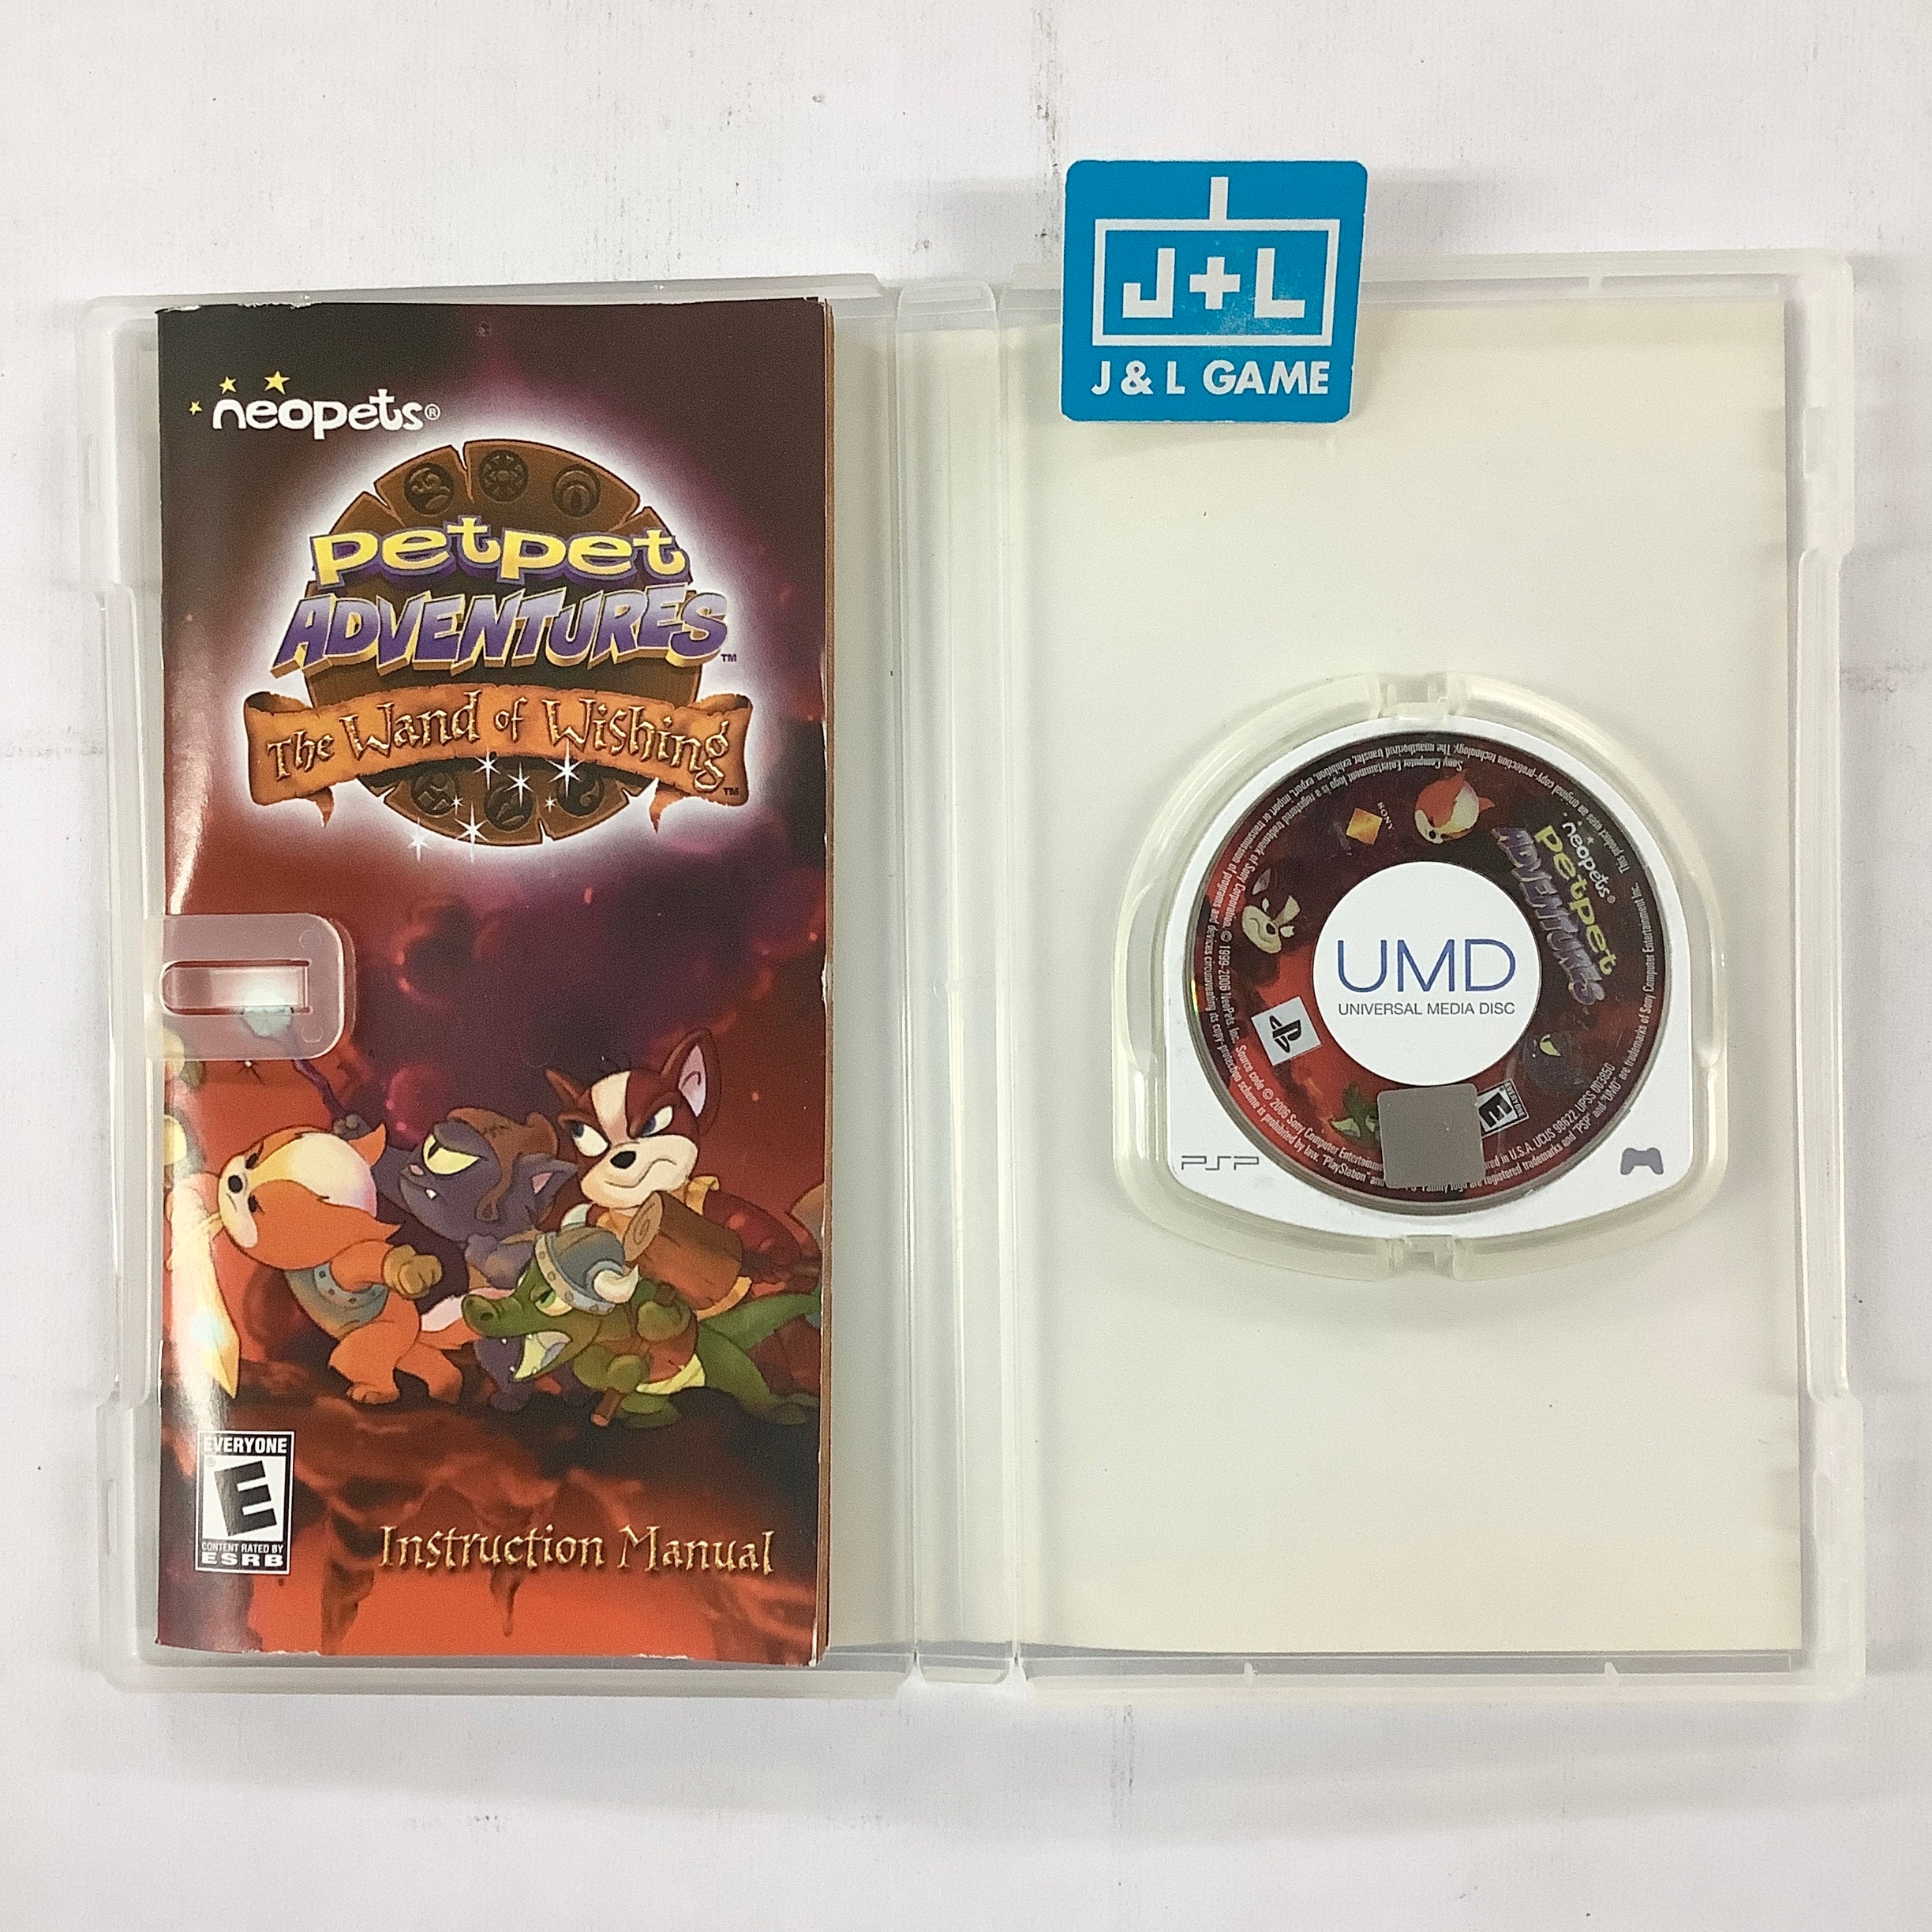 Neopets Petpet Adventures: The Wand of Wishing - SONY PSP [Pre-Owned] Video Games SCEA   